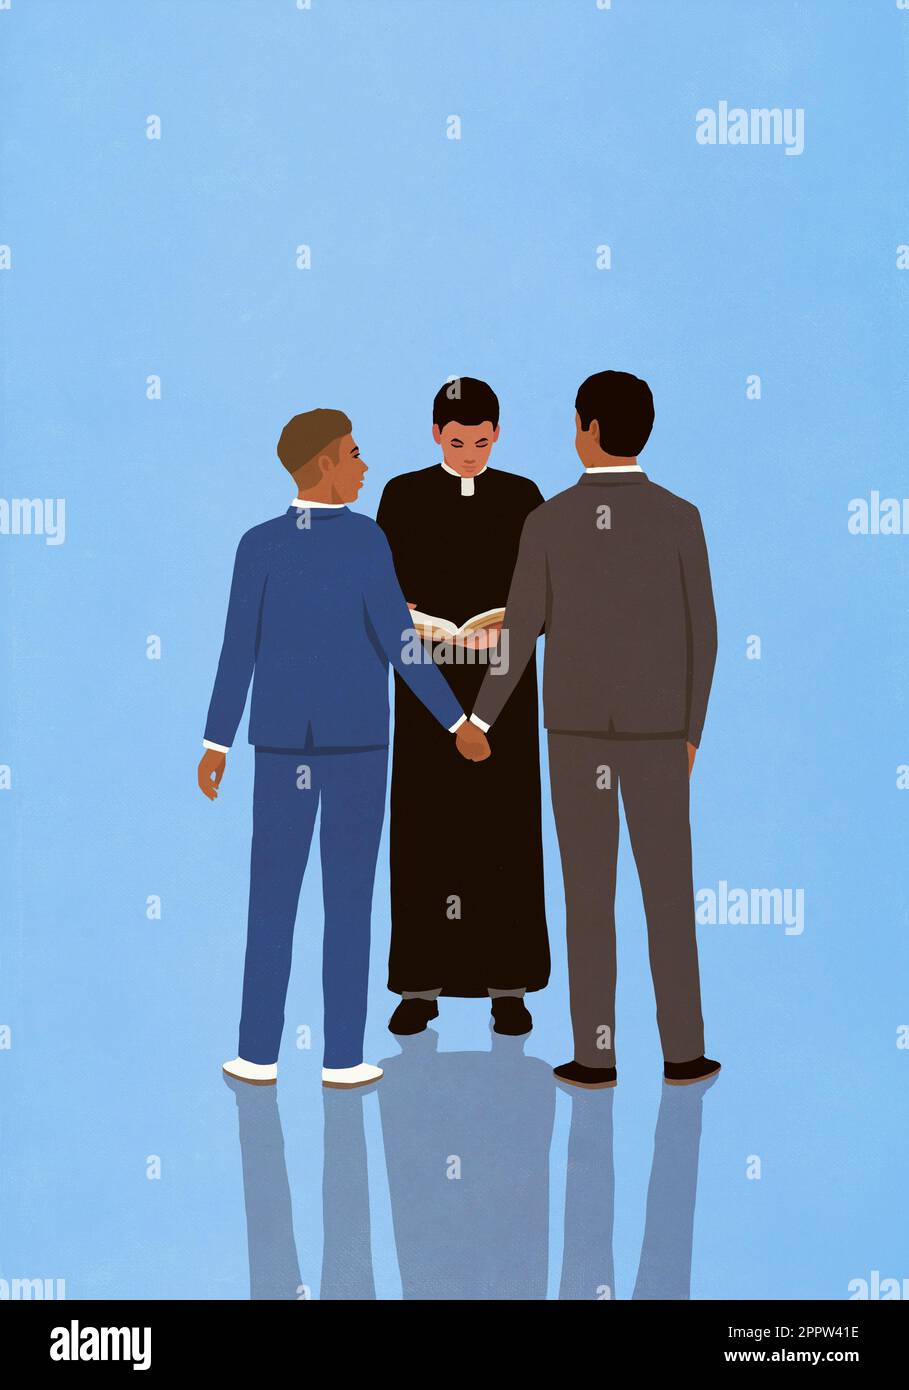 Priest marrying gay male couple holding hands on blue background Stock Photo